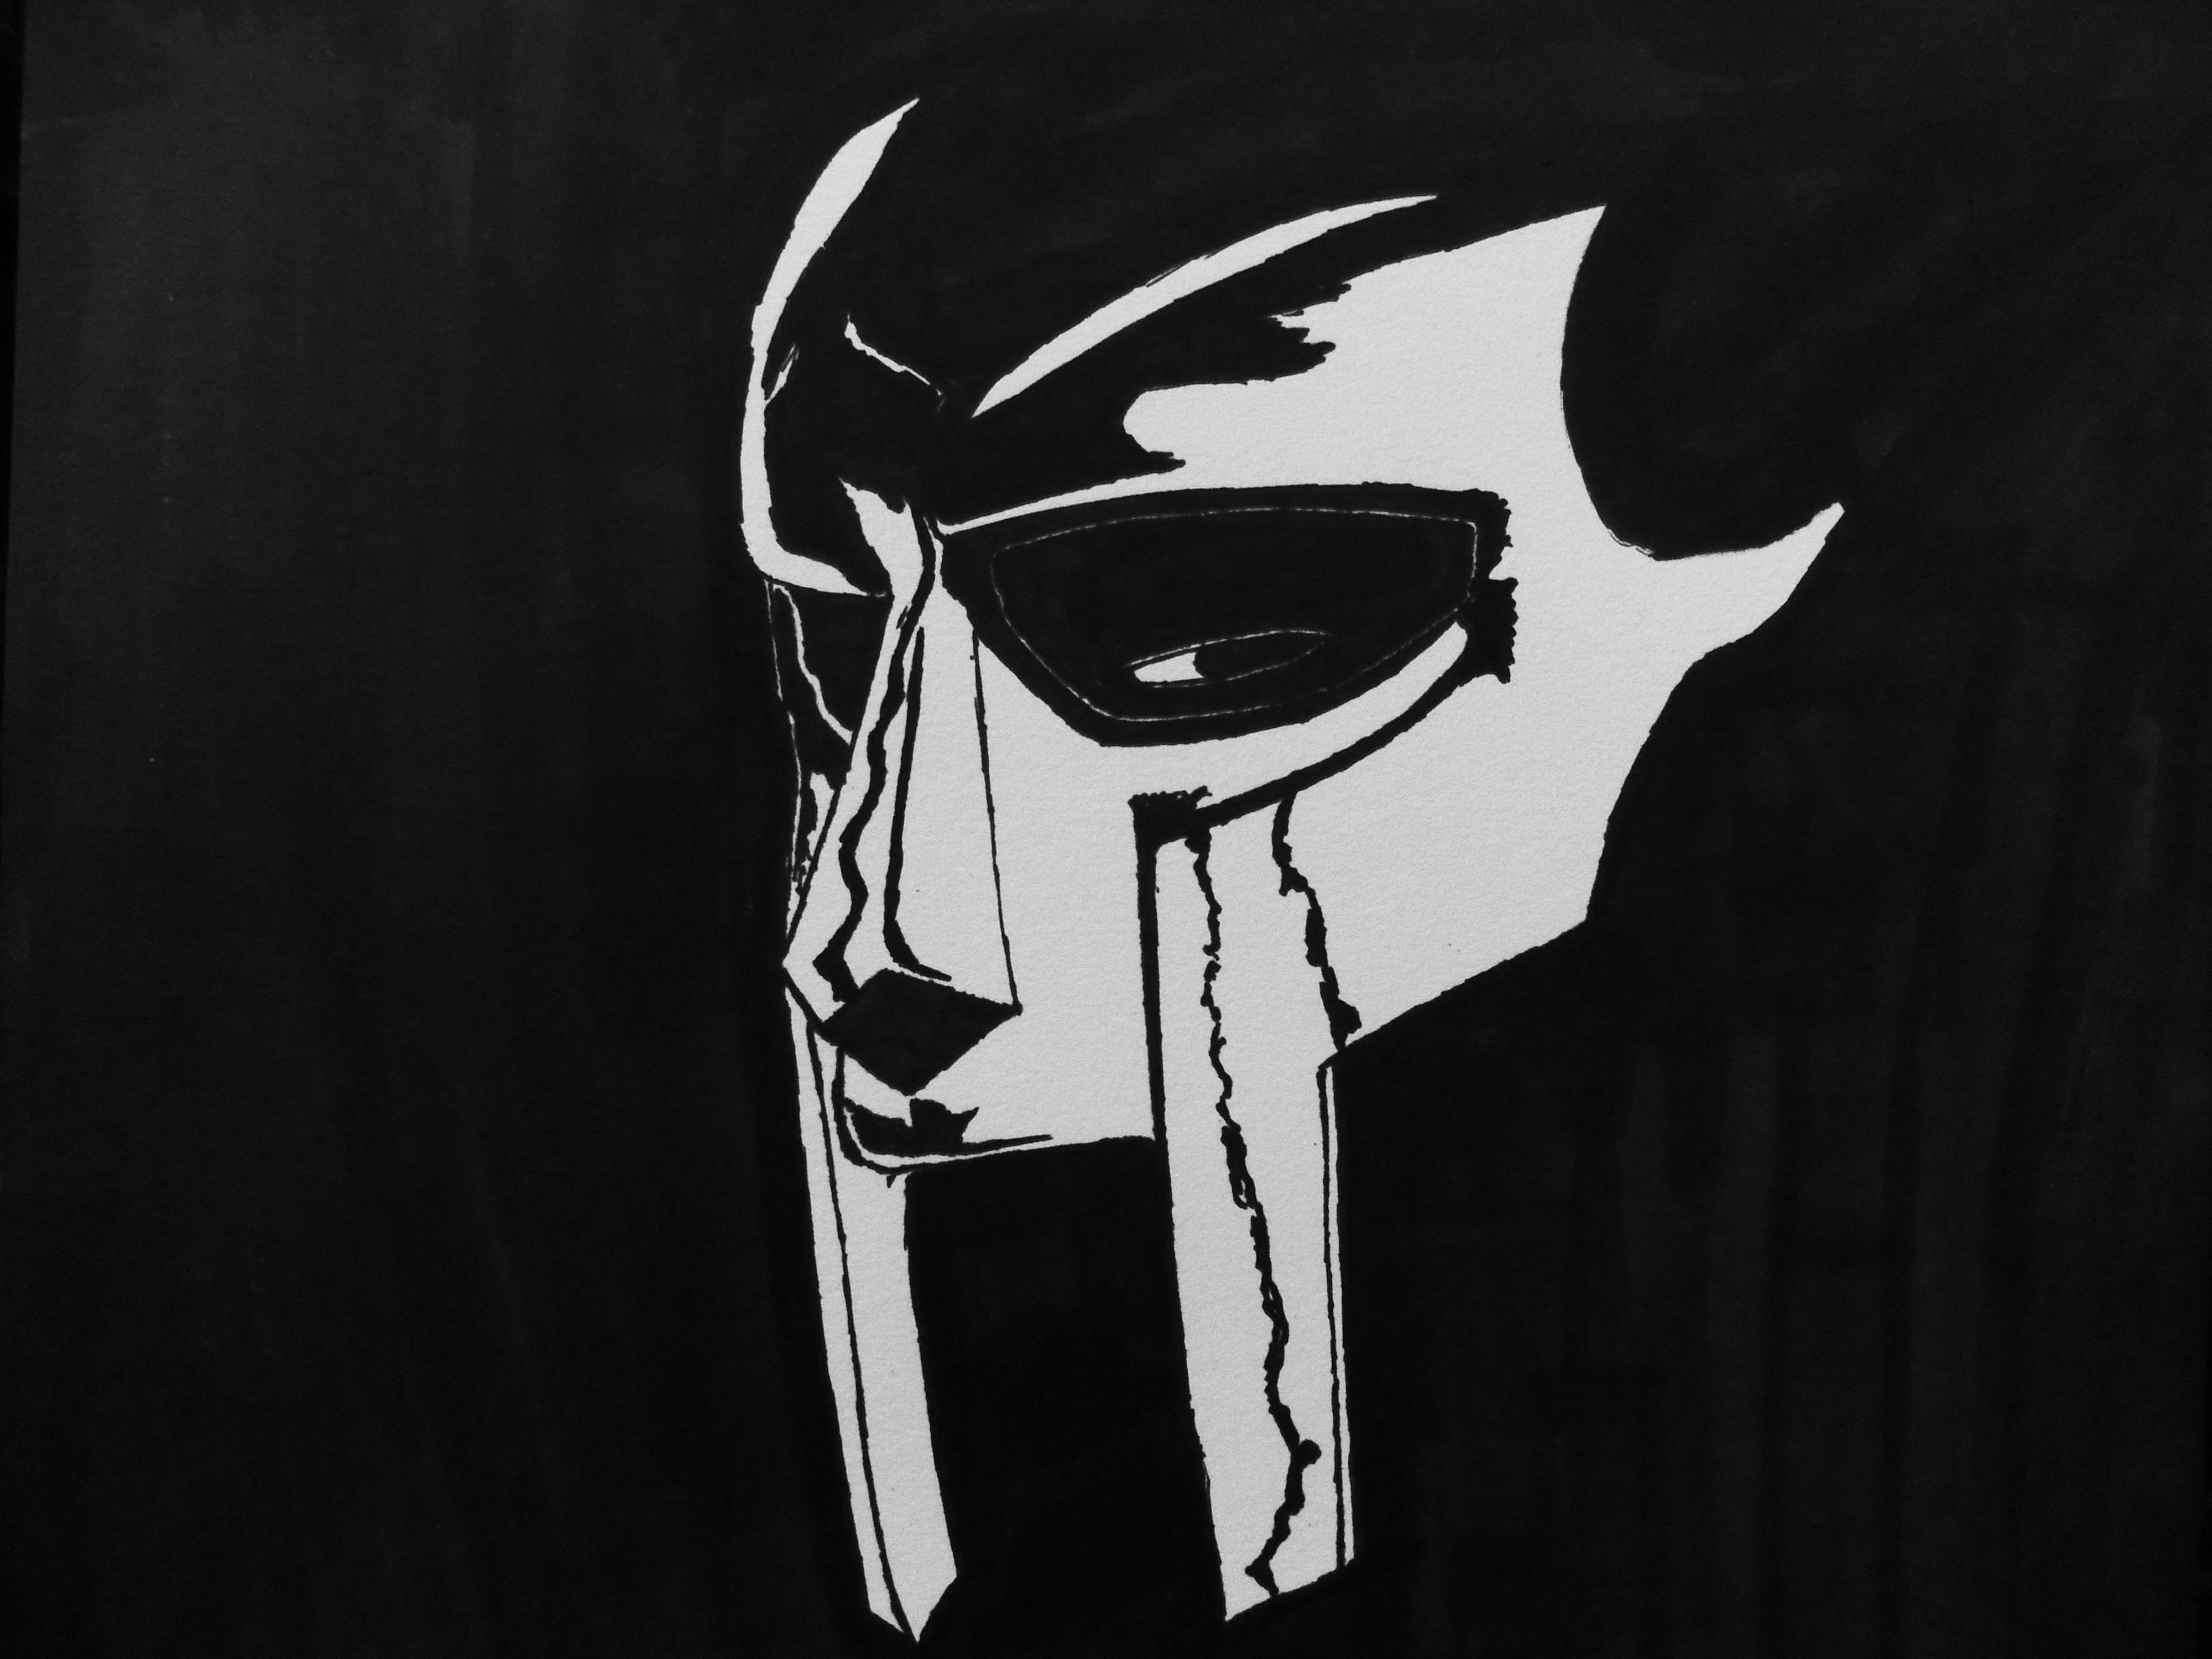 Nothing special just wanted to share my artwork Rest In Peace MF DOOM   Scrolller